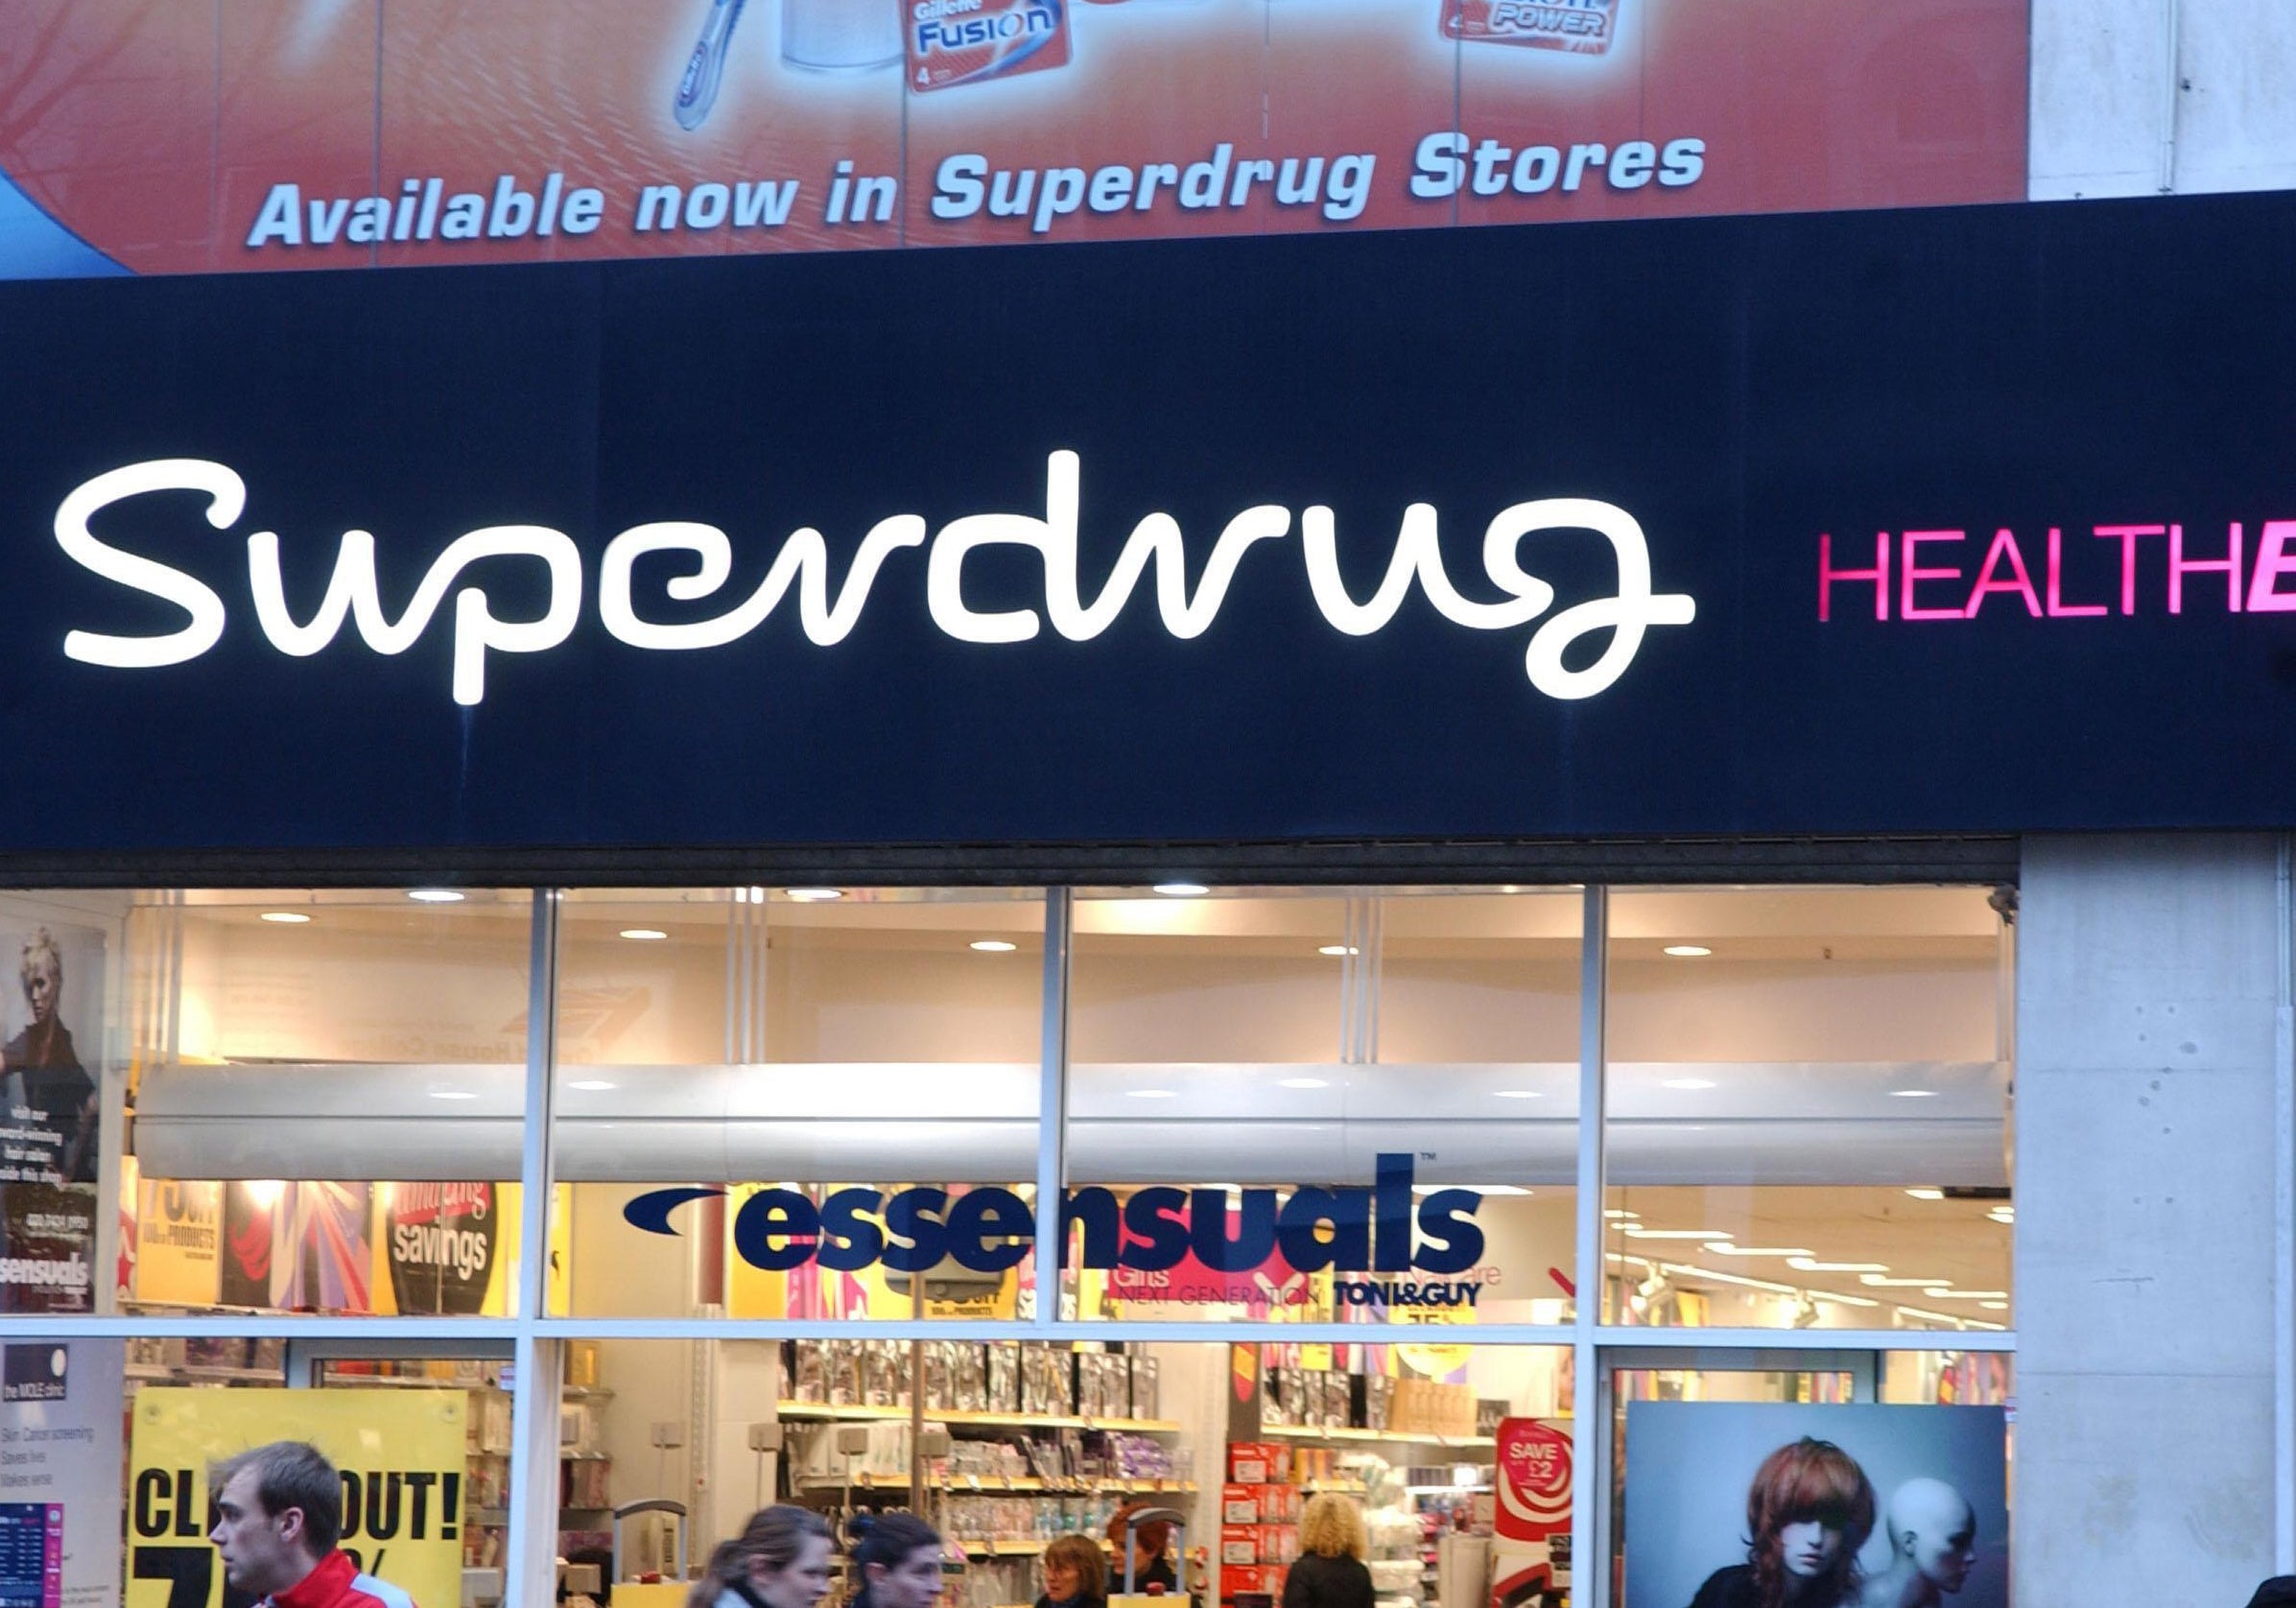 Superdrug has warned customers their data may have been stolen